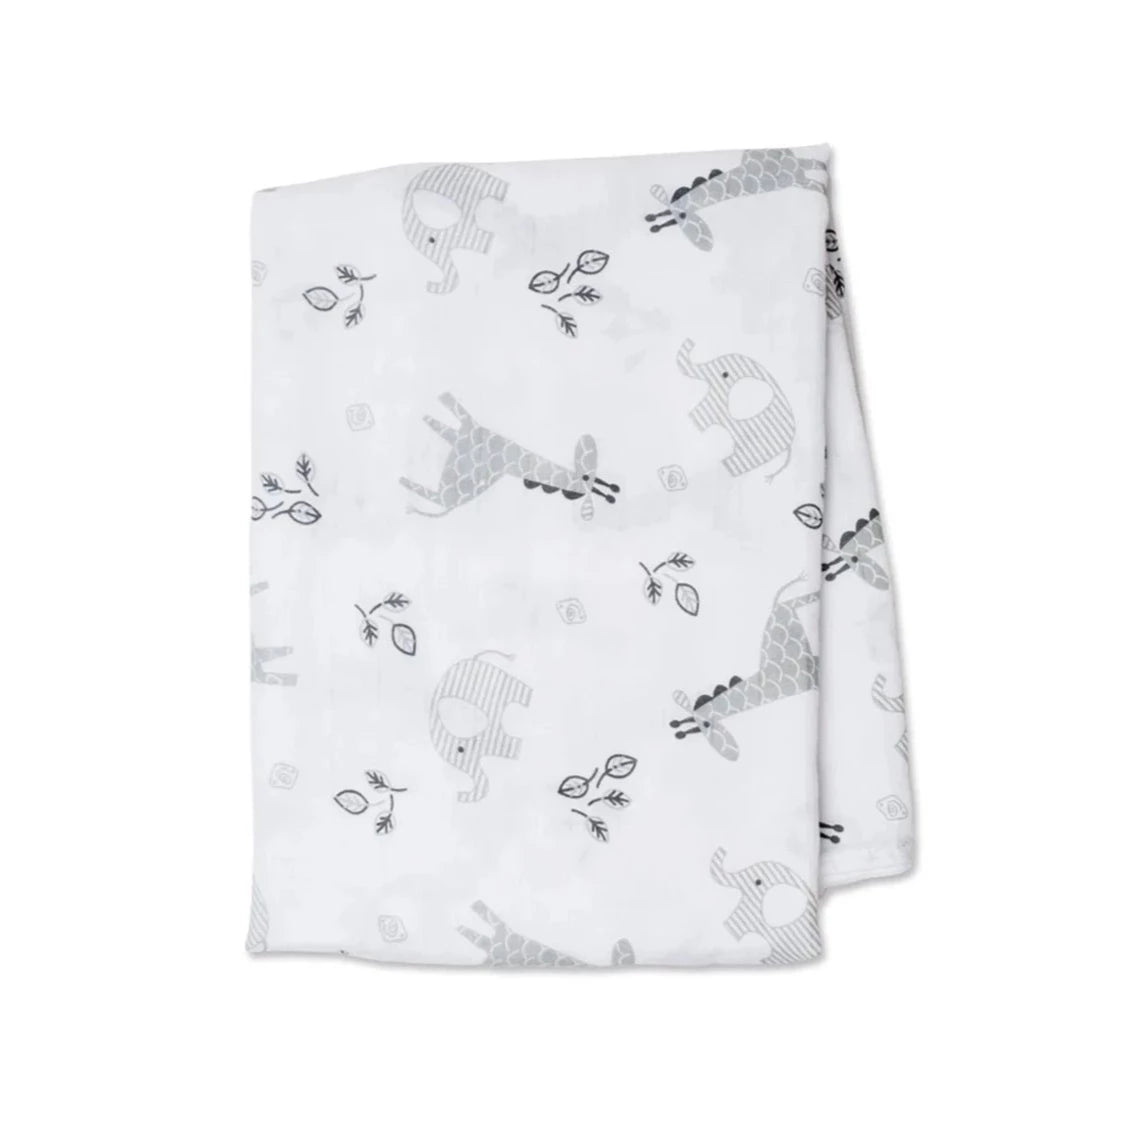 Cotton Baby Swaddle Blanket With Animals Pattern